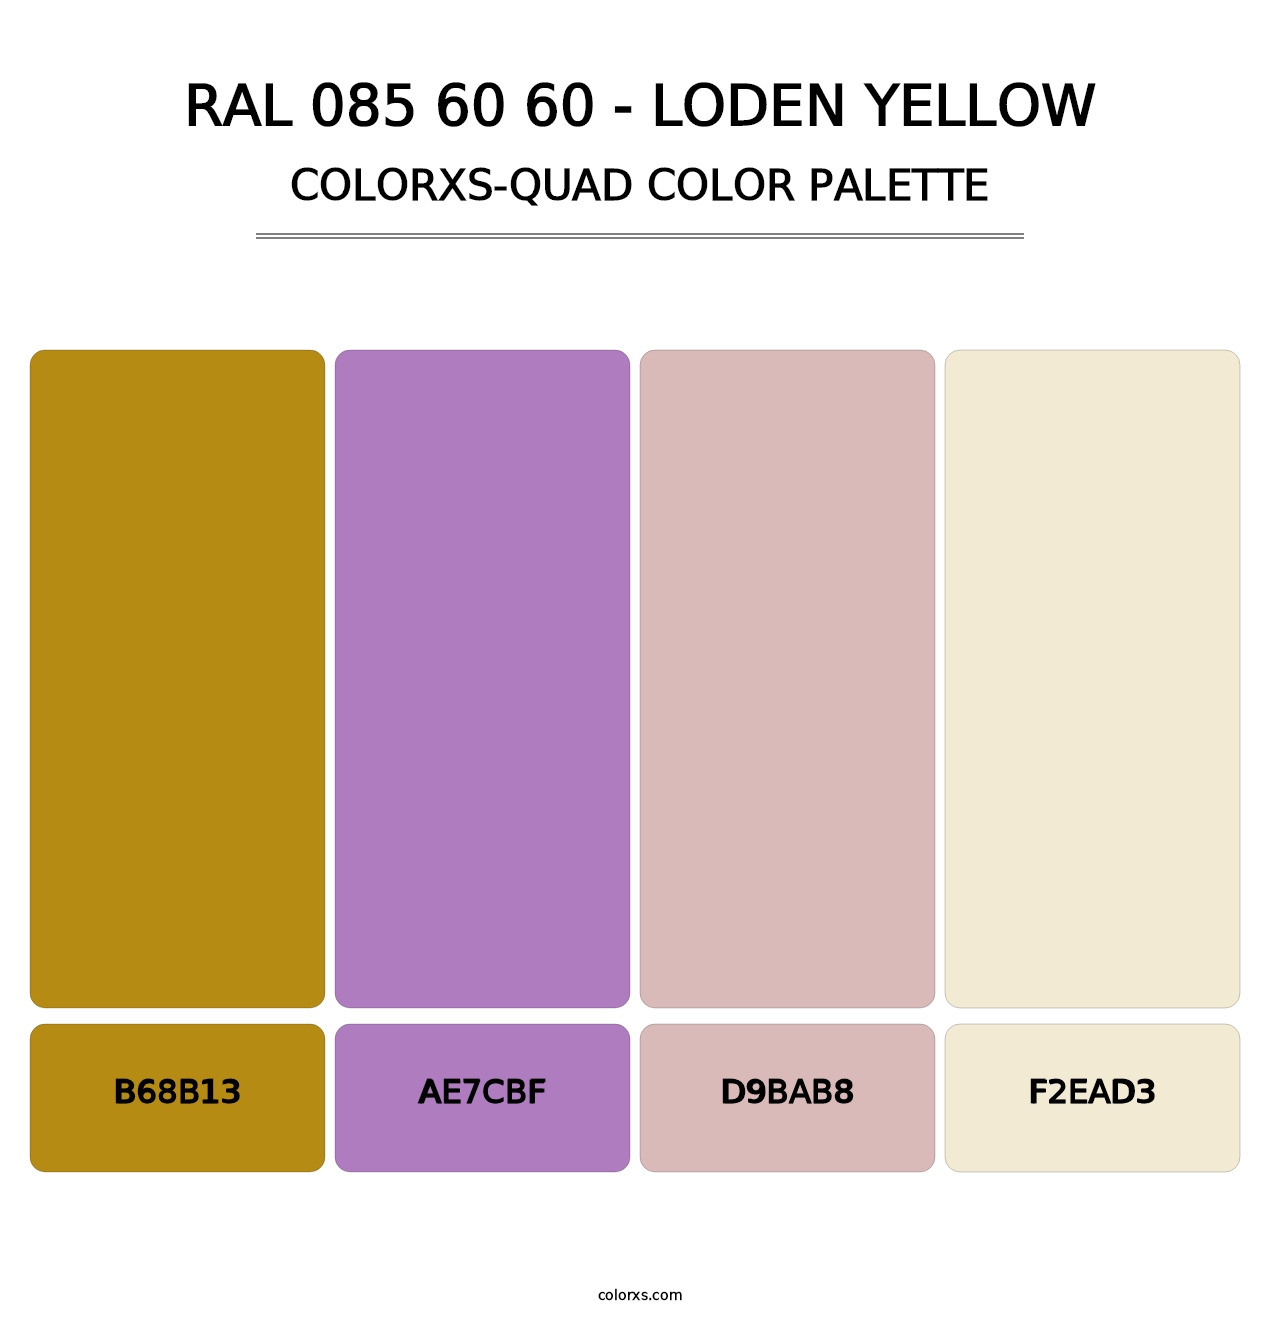 RAL 085 60 60 - Loden Yellow - Colorxs Quad Palette